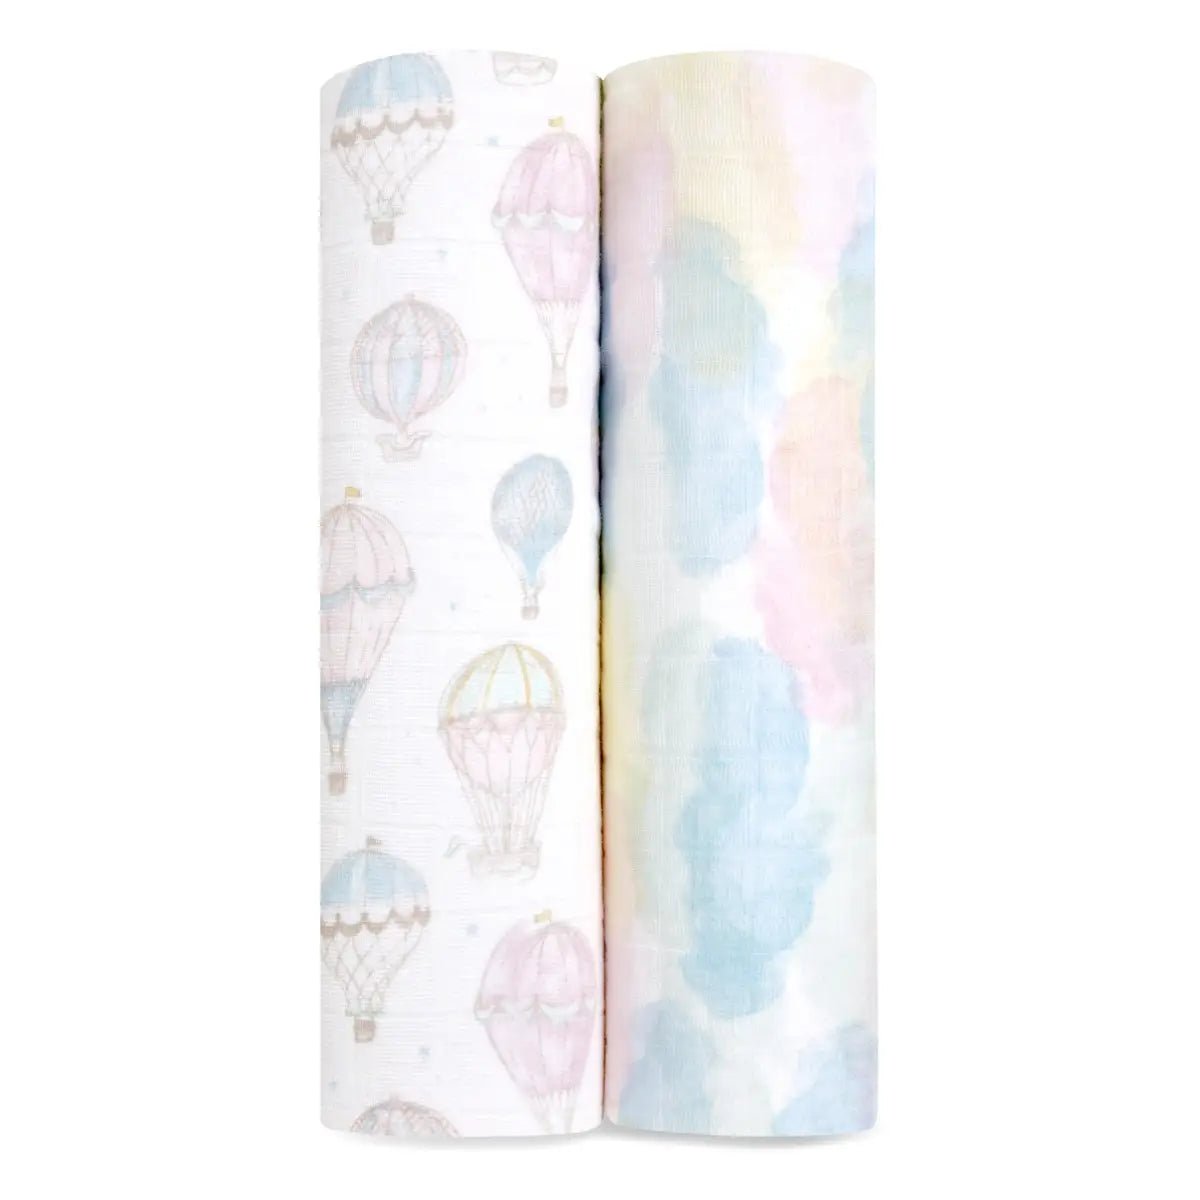 ADEN + ANAIS Large Swaddles 2 Pack Cotton - Above the Clouds